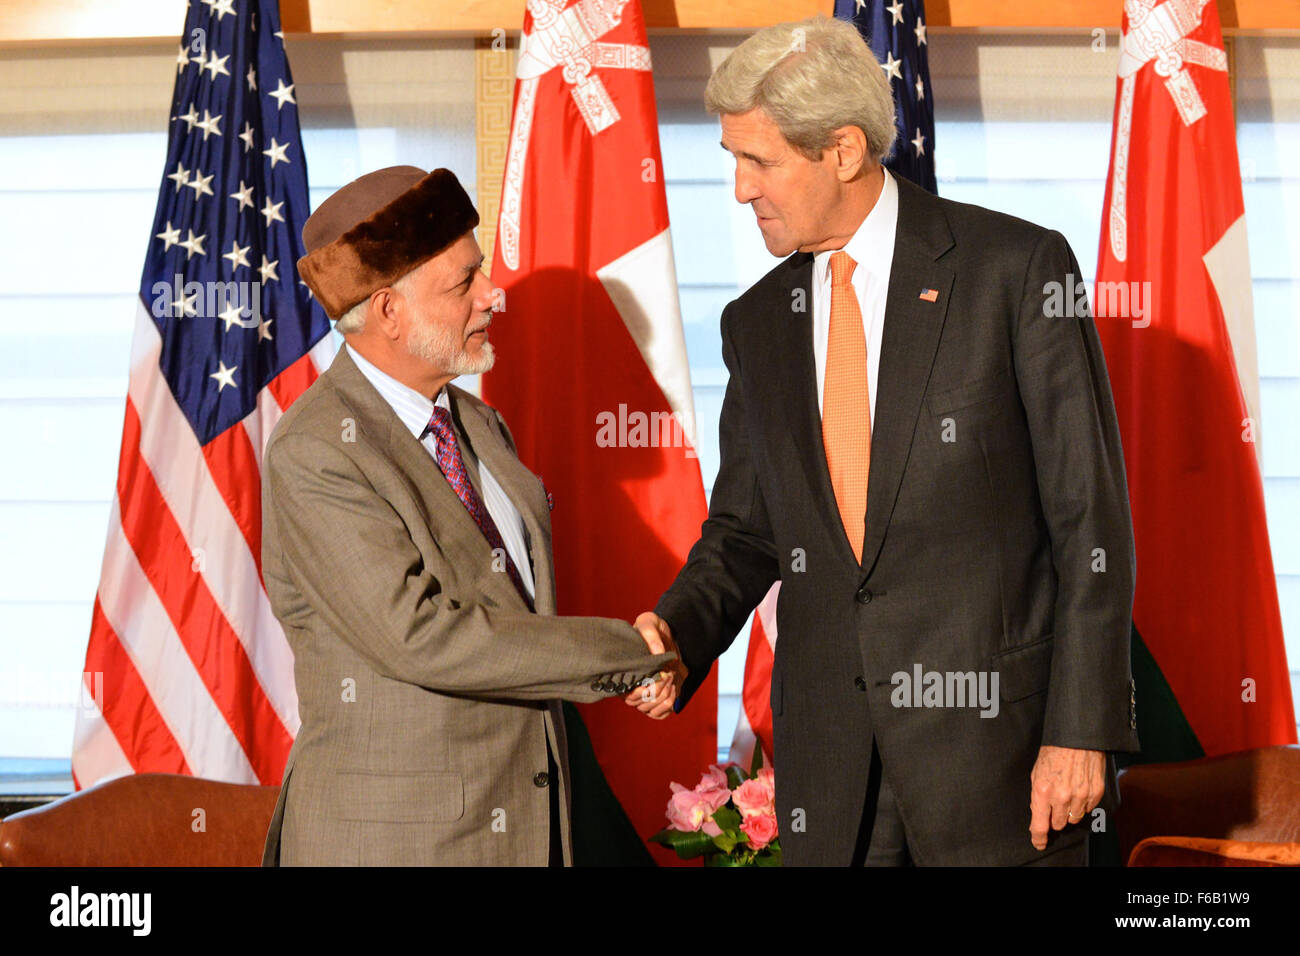 Secretary Kerry Shakes Hands With Omani Foreign Minister bin Alawi Before Their Meeting in New York City Stock Photo